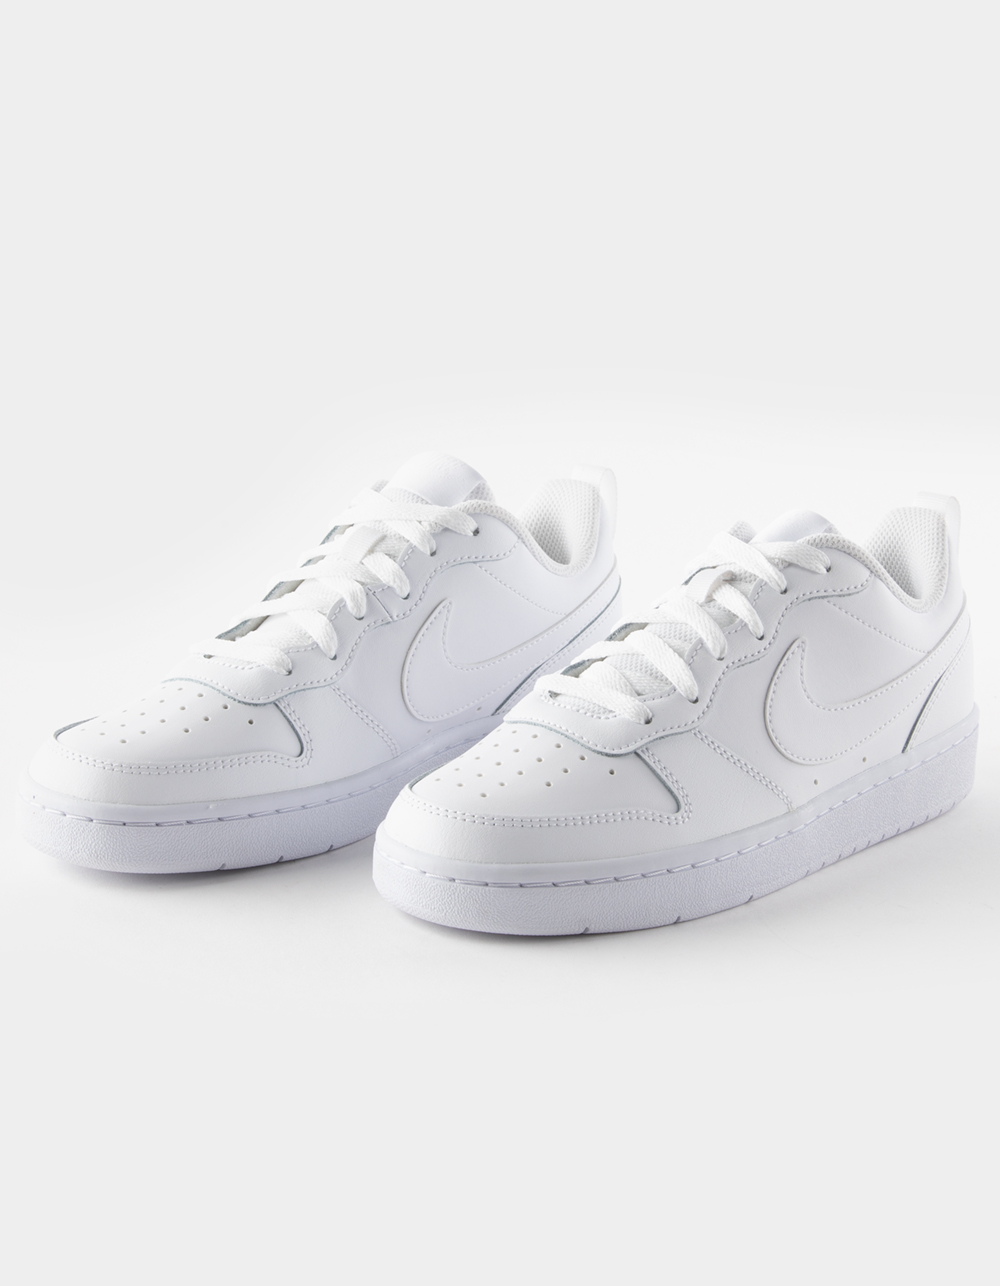 Ridículo perderse rival NIKE Court Borough Low 2 Kids Shoes - WHITE | Tillys